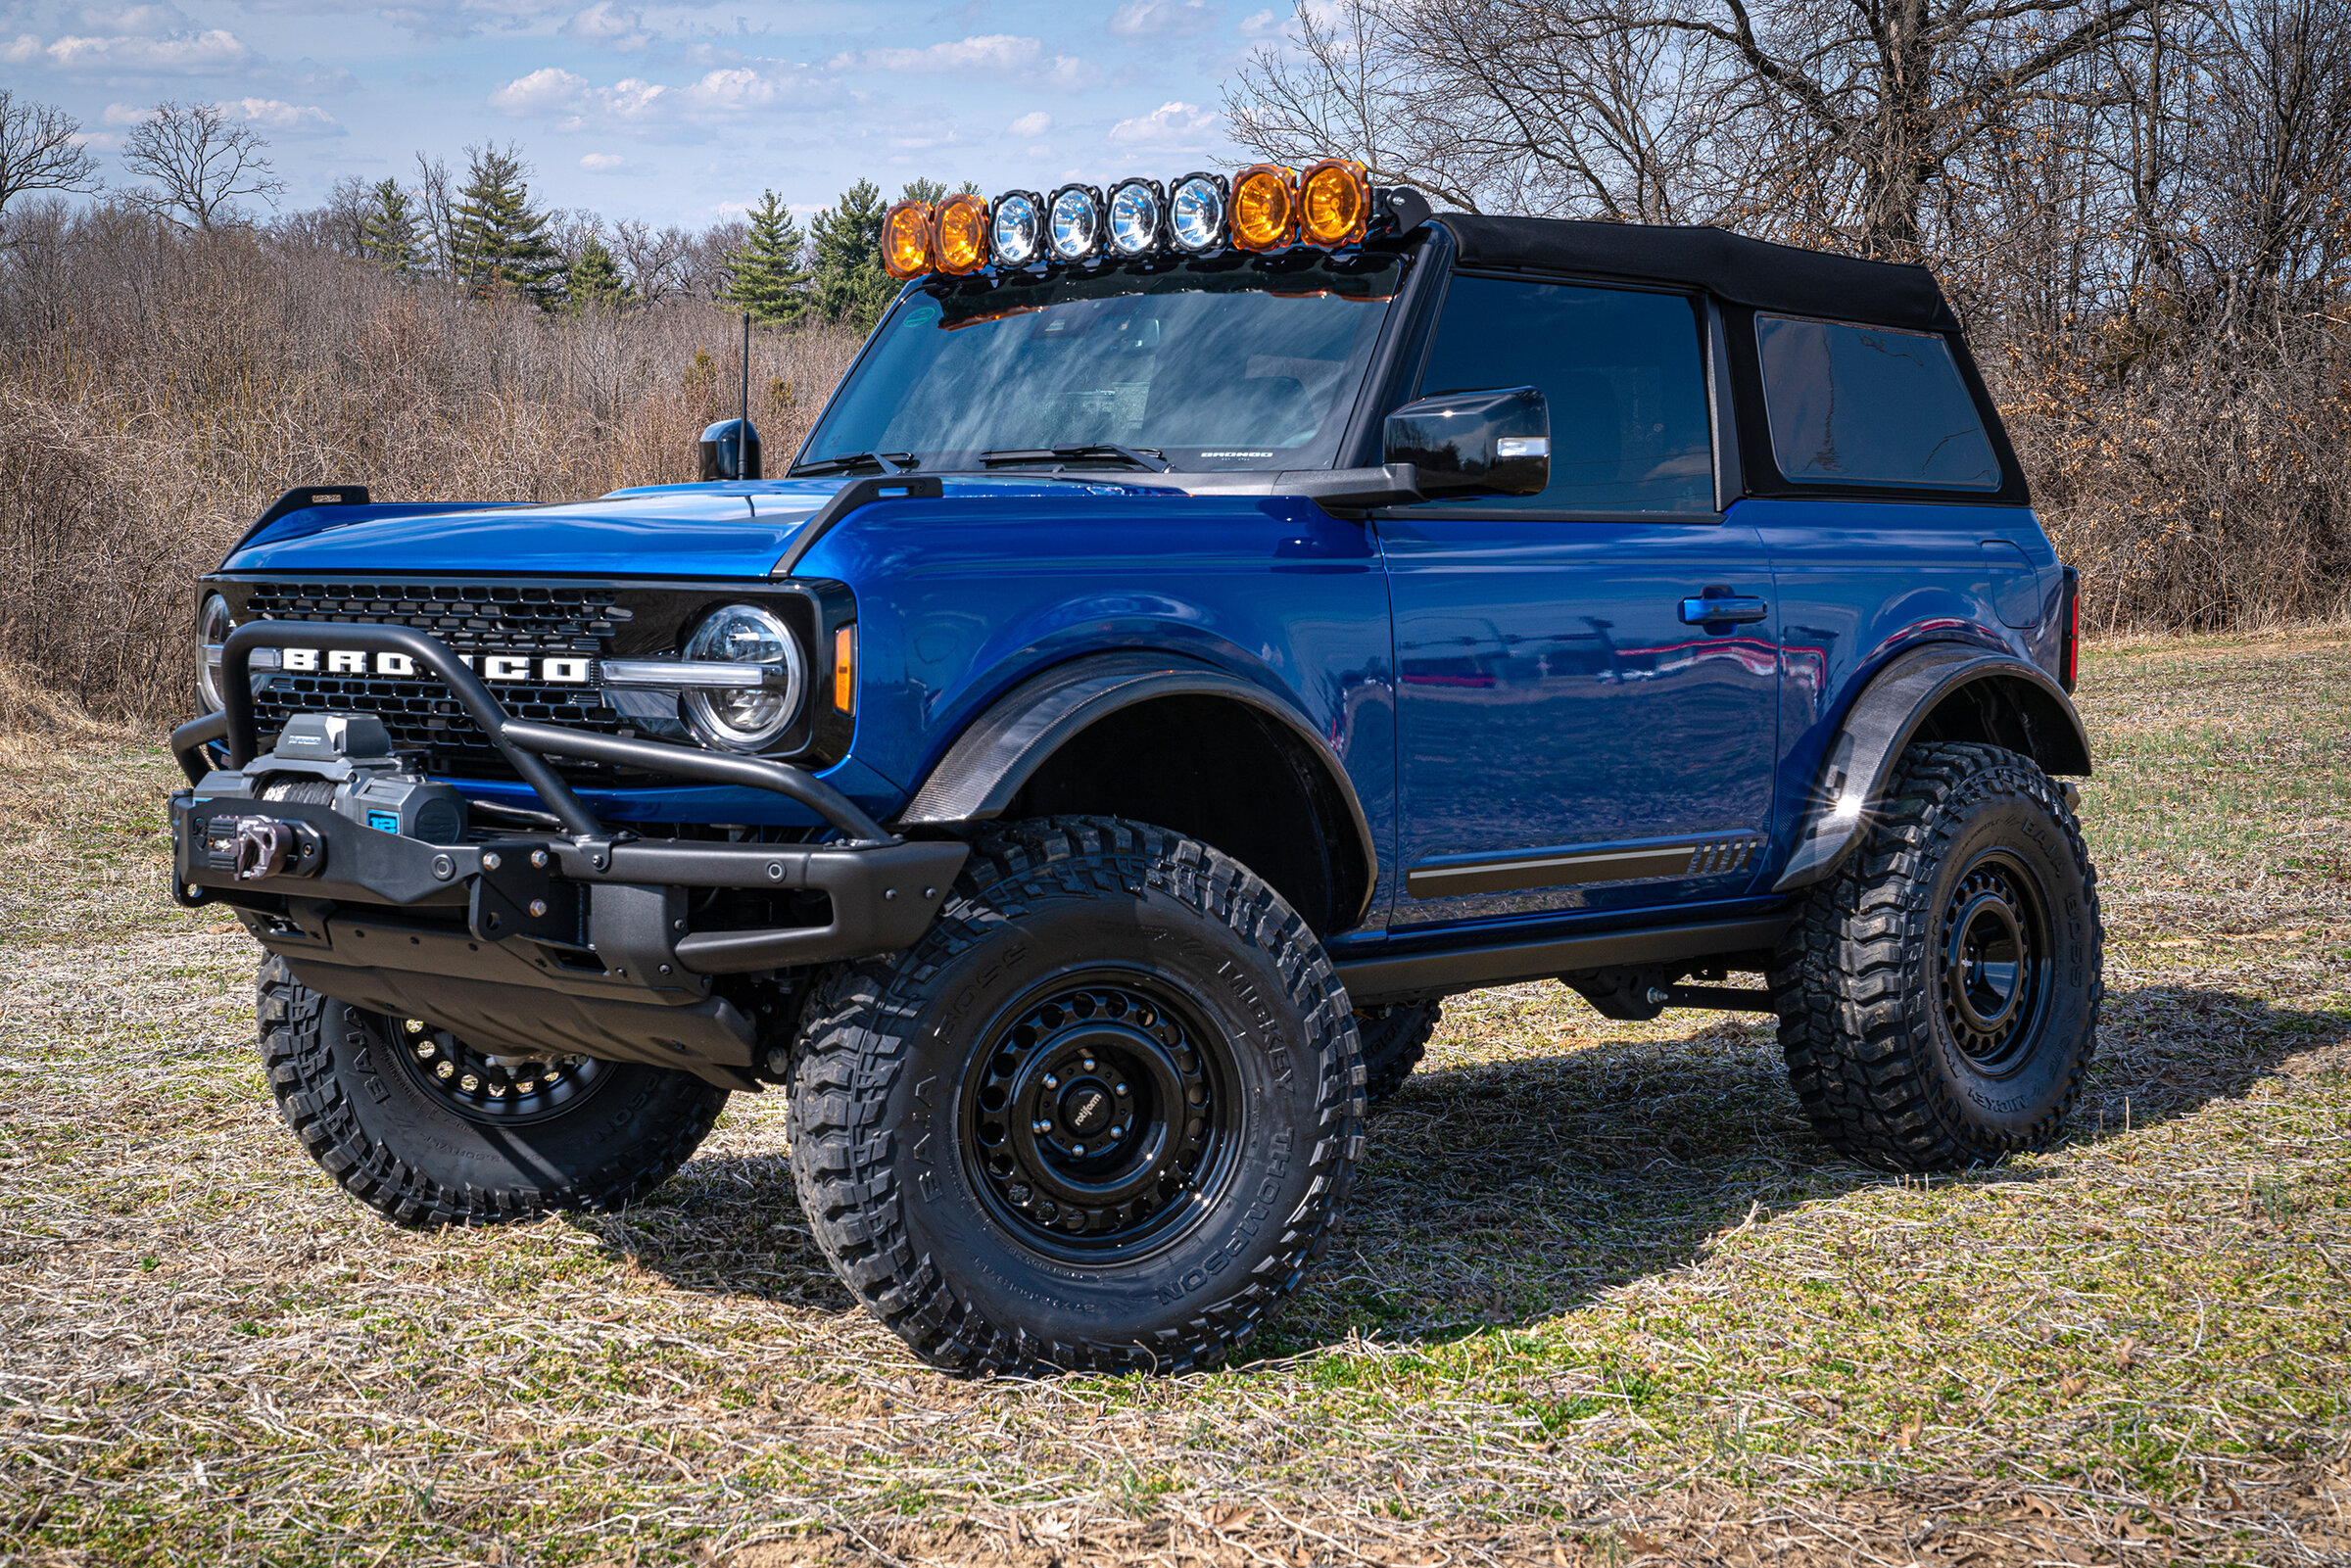 Ford Bronco Lbracket 2 door FE build (UPDATED) on Zone 3" lift and 37's F94FD214-28F9-4784-B031-2591E323564D